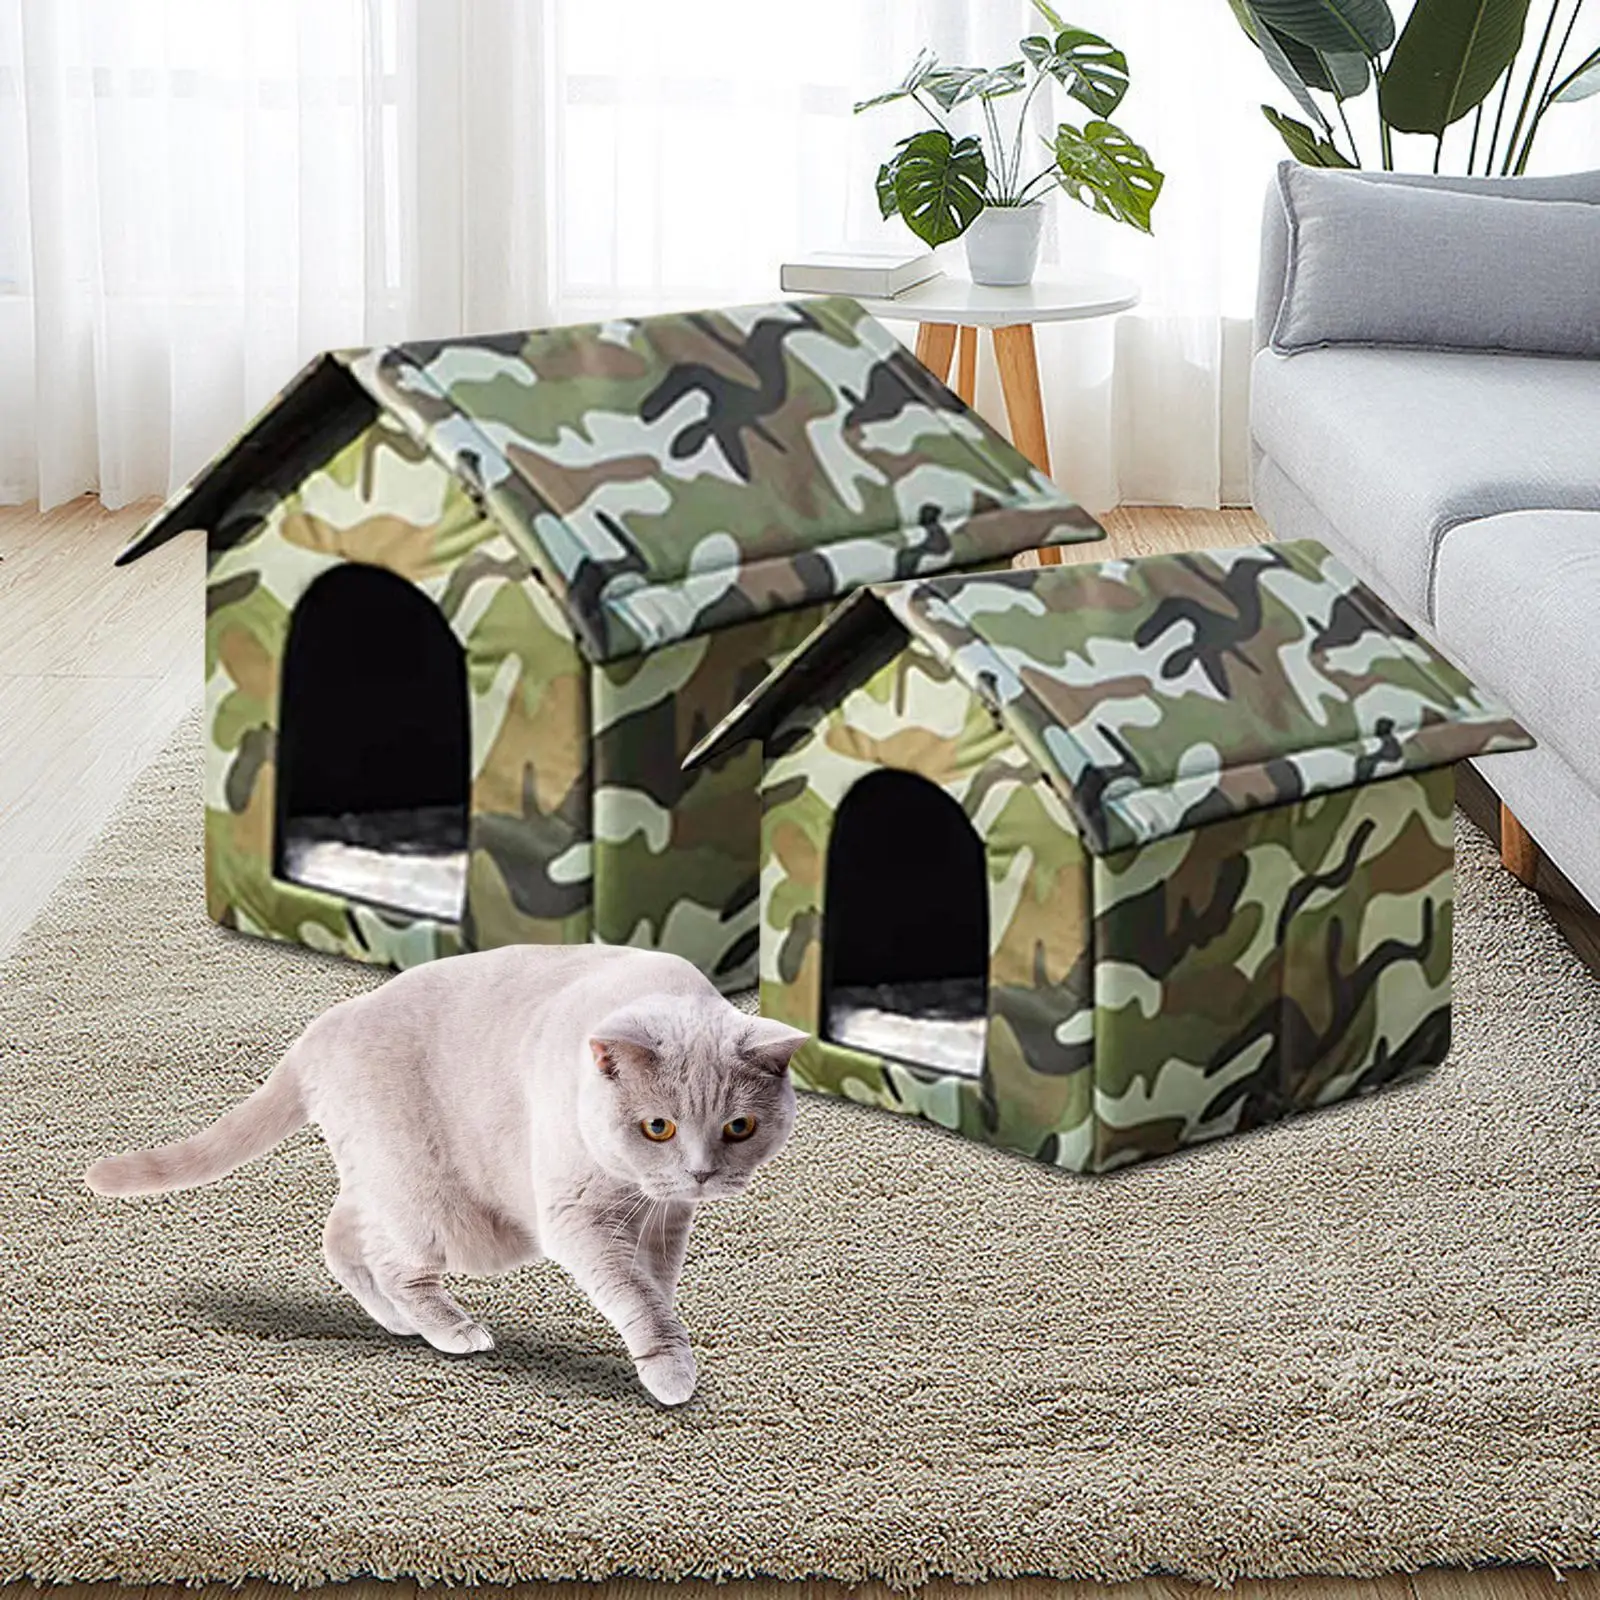 Oxford Cloth Stray Cats Shelter Weatherproof Kennel Bed Puppy Kitten Small Dogs Outdoor Feral Cats Warm House for Indoor Outdoor